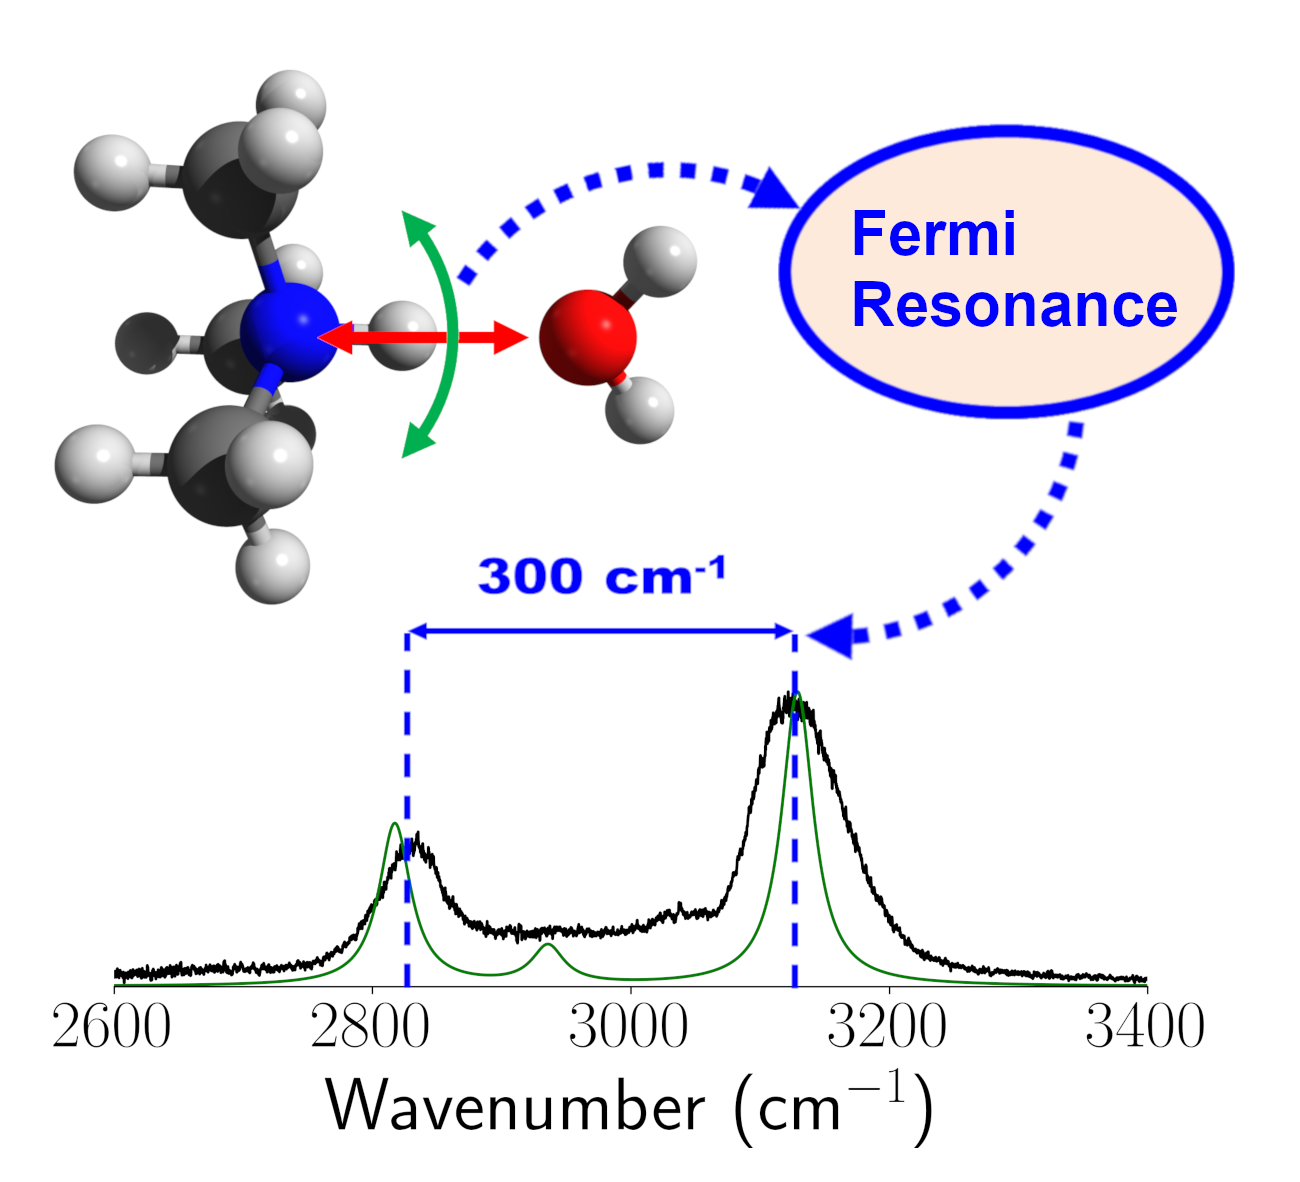 Strong Fermi resonance associated with proton motions revealed by vibrational spectra of asymmetric proton bound dimers